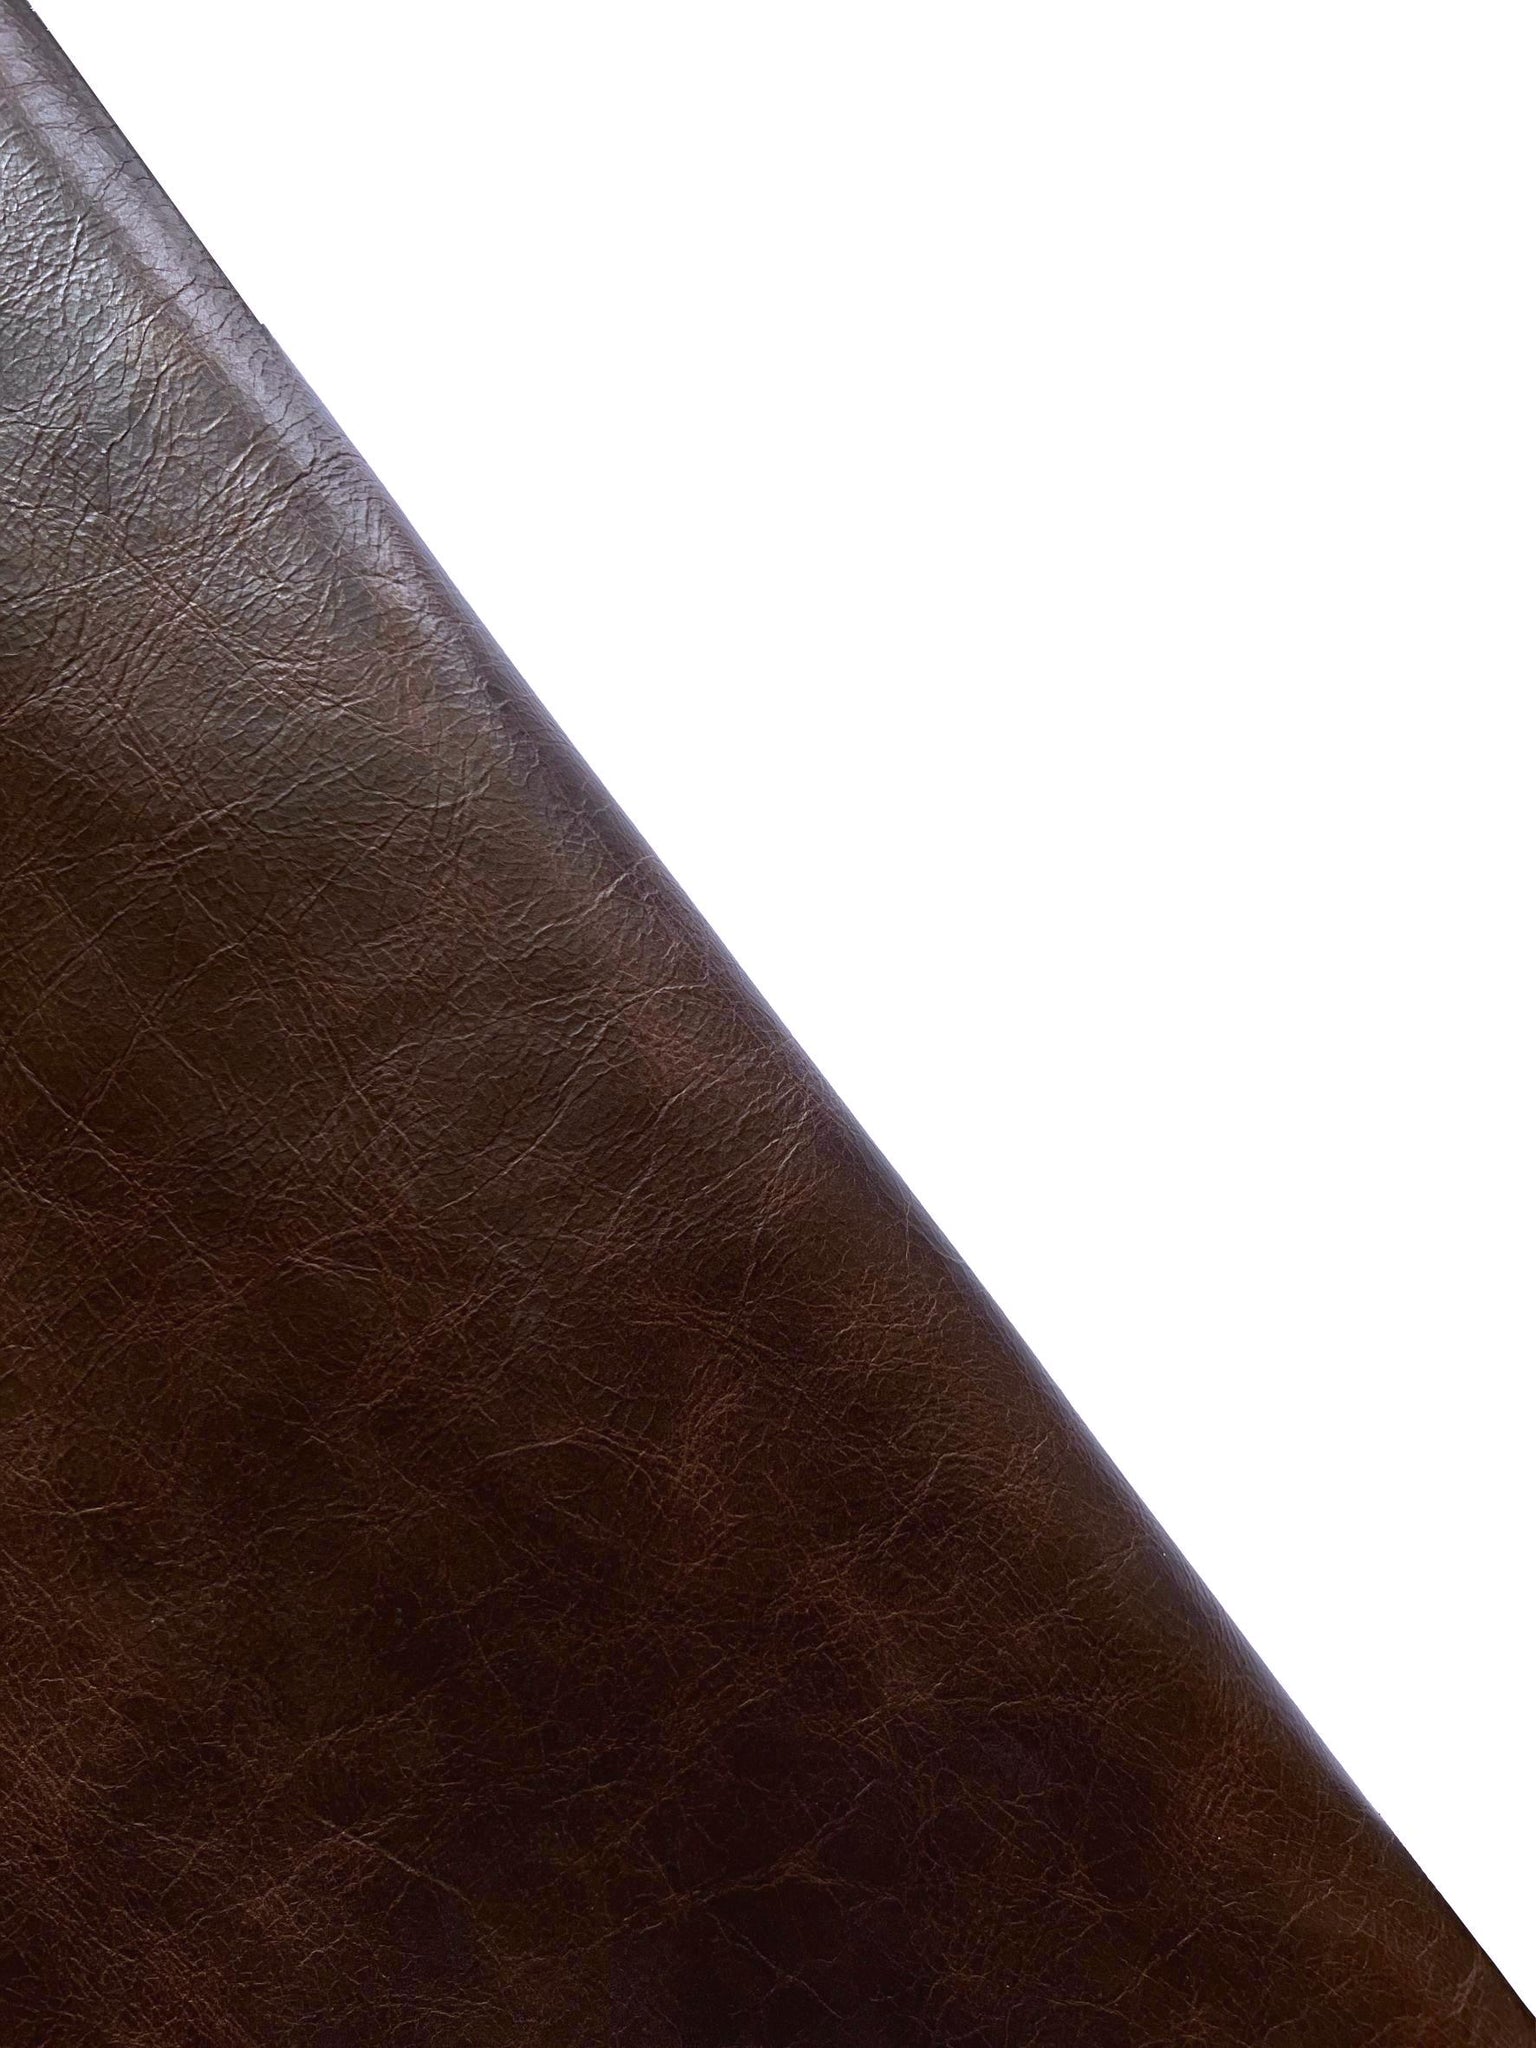 Cordovan Distressed Cow Leather Whole Hide (Upholstery Leather)